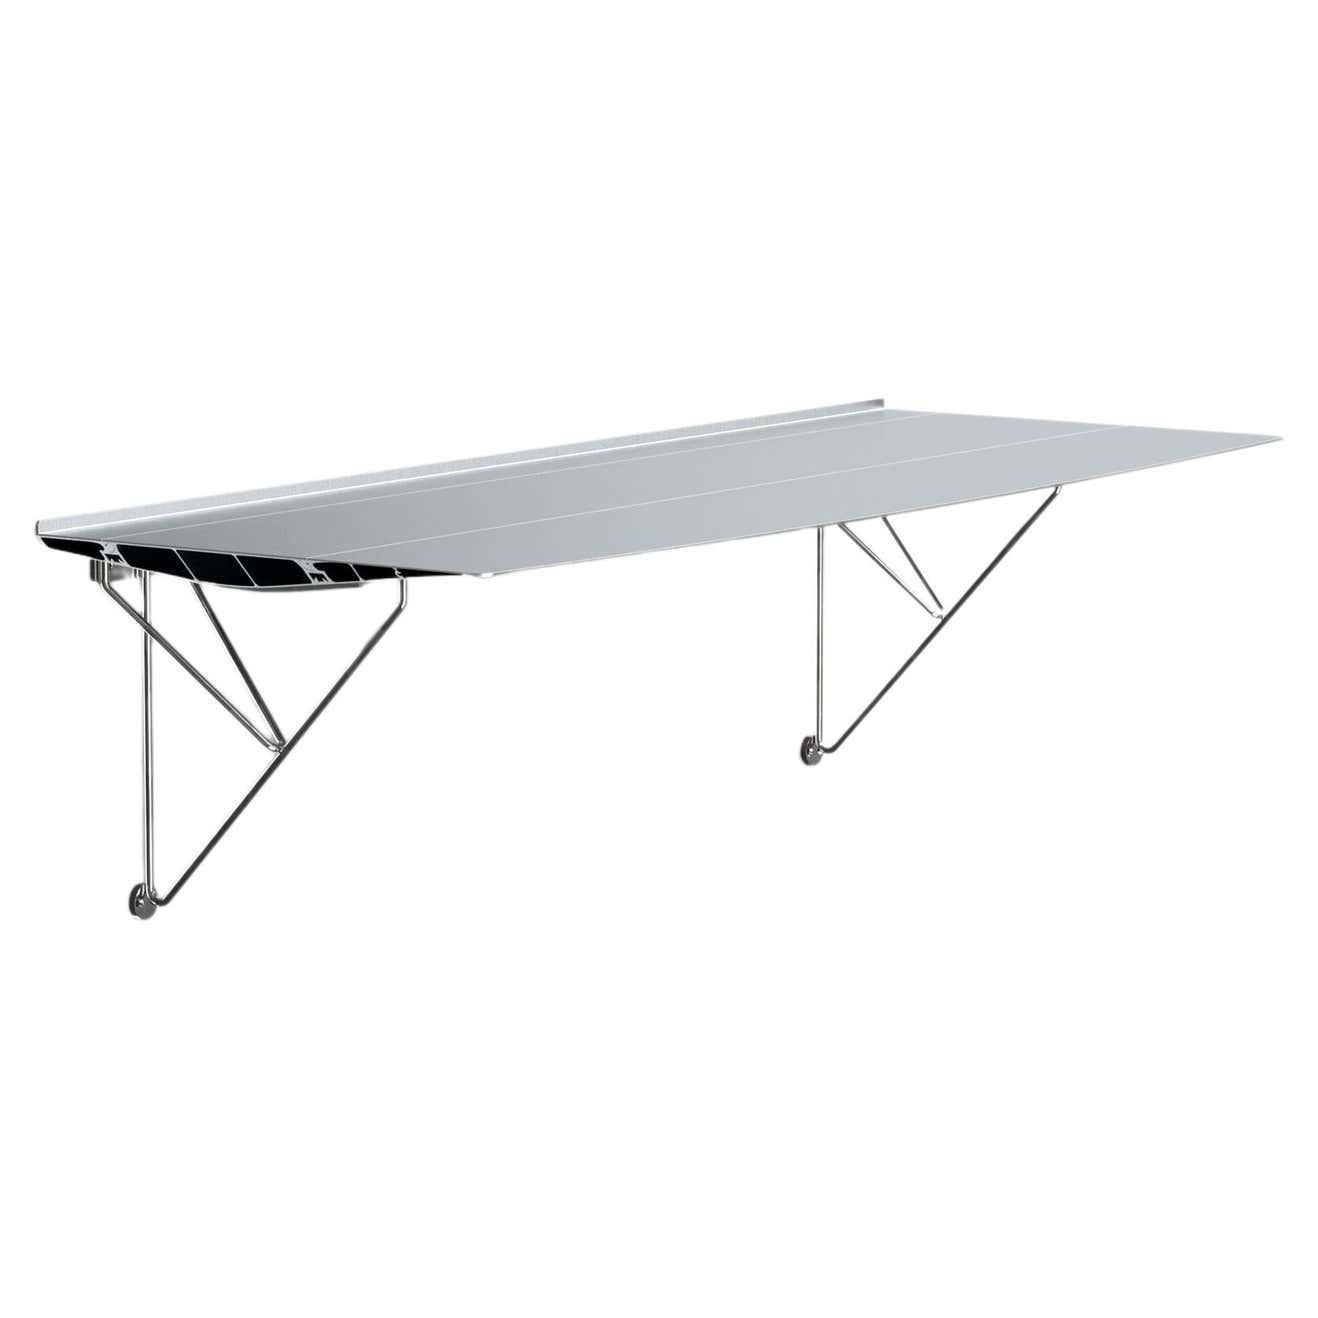 Spanish Table B Desk Wall-Mounted Aluminum Anodized Silver Top Stainless Steel Rod Legs